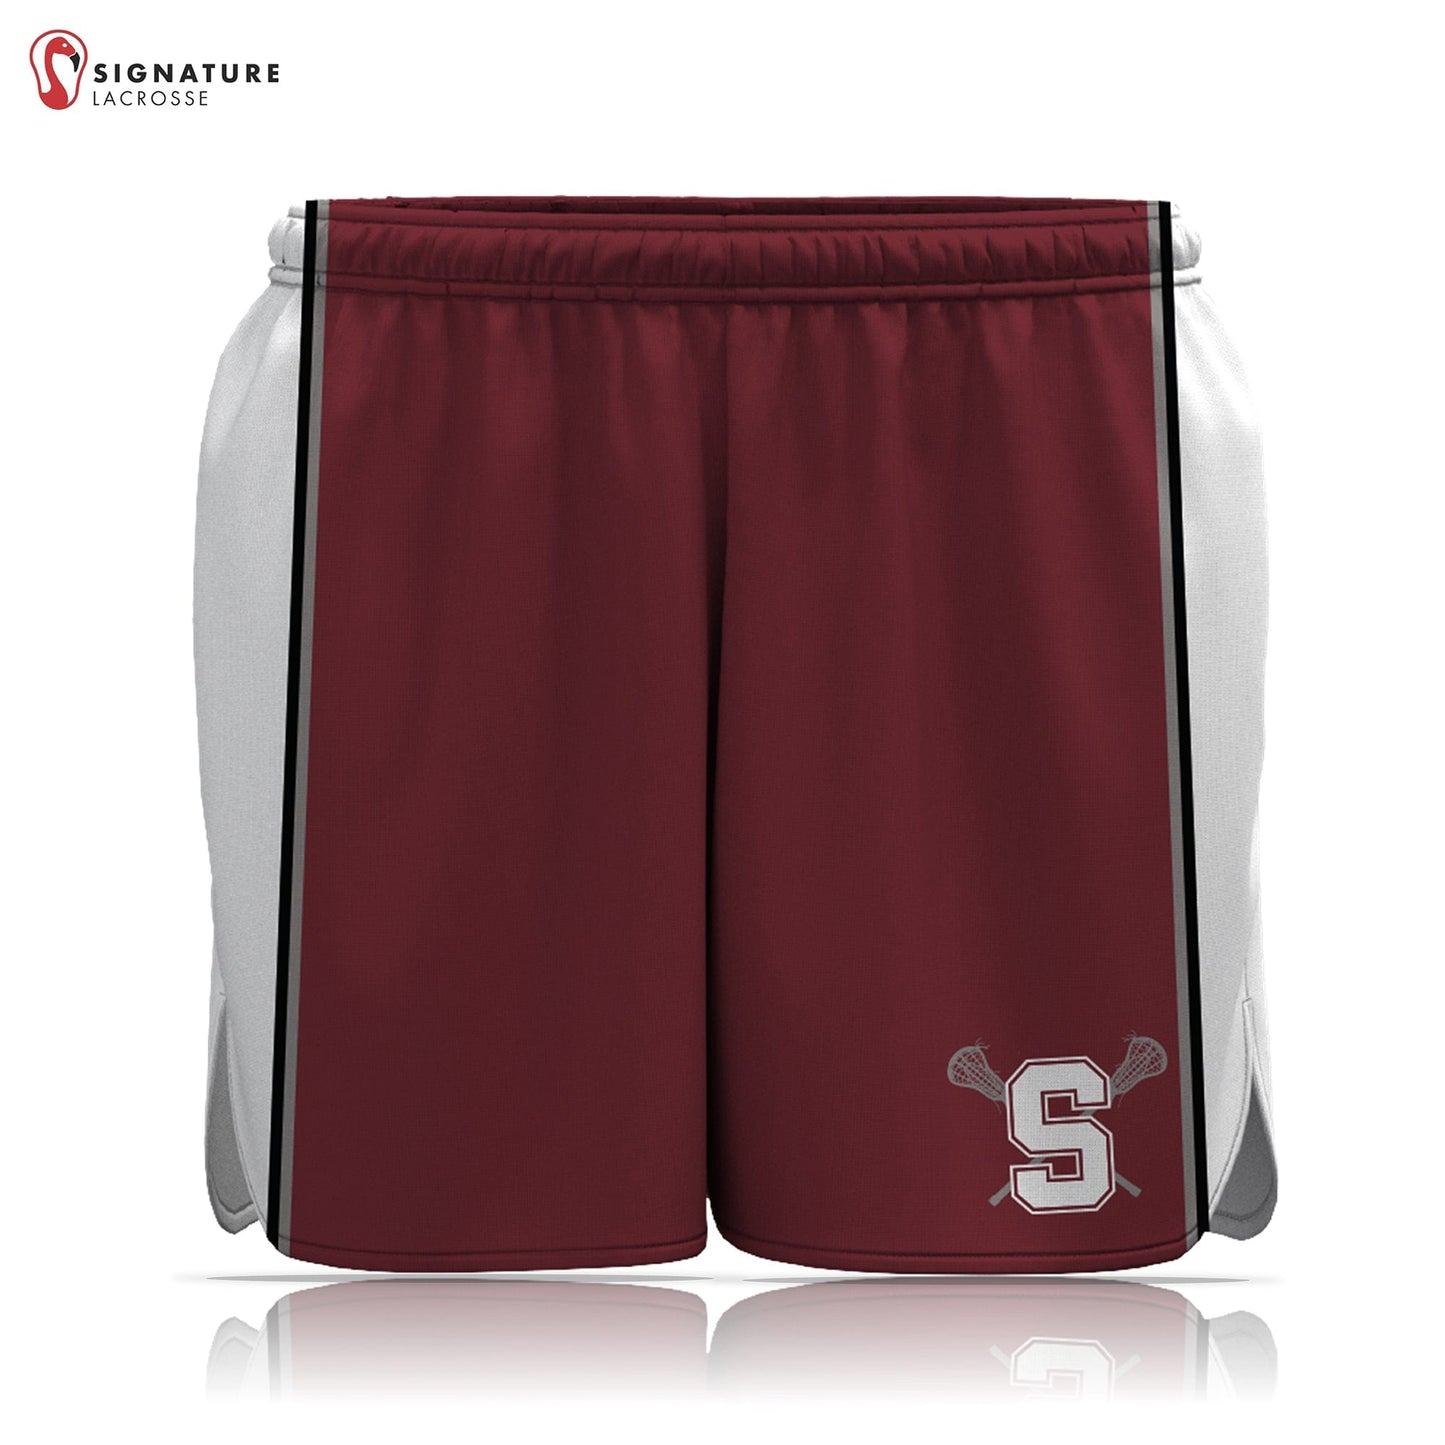 State College Women's Player Game Shorts: 3-4 Signature Lacrosse